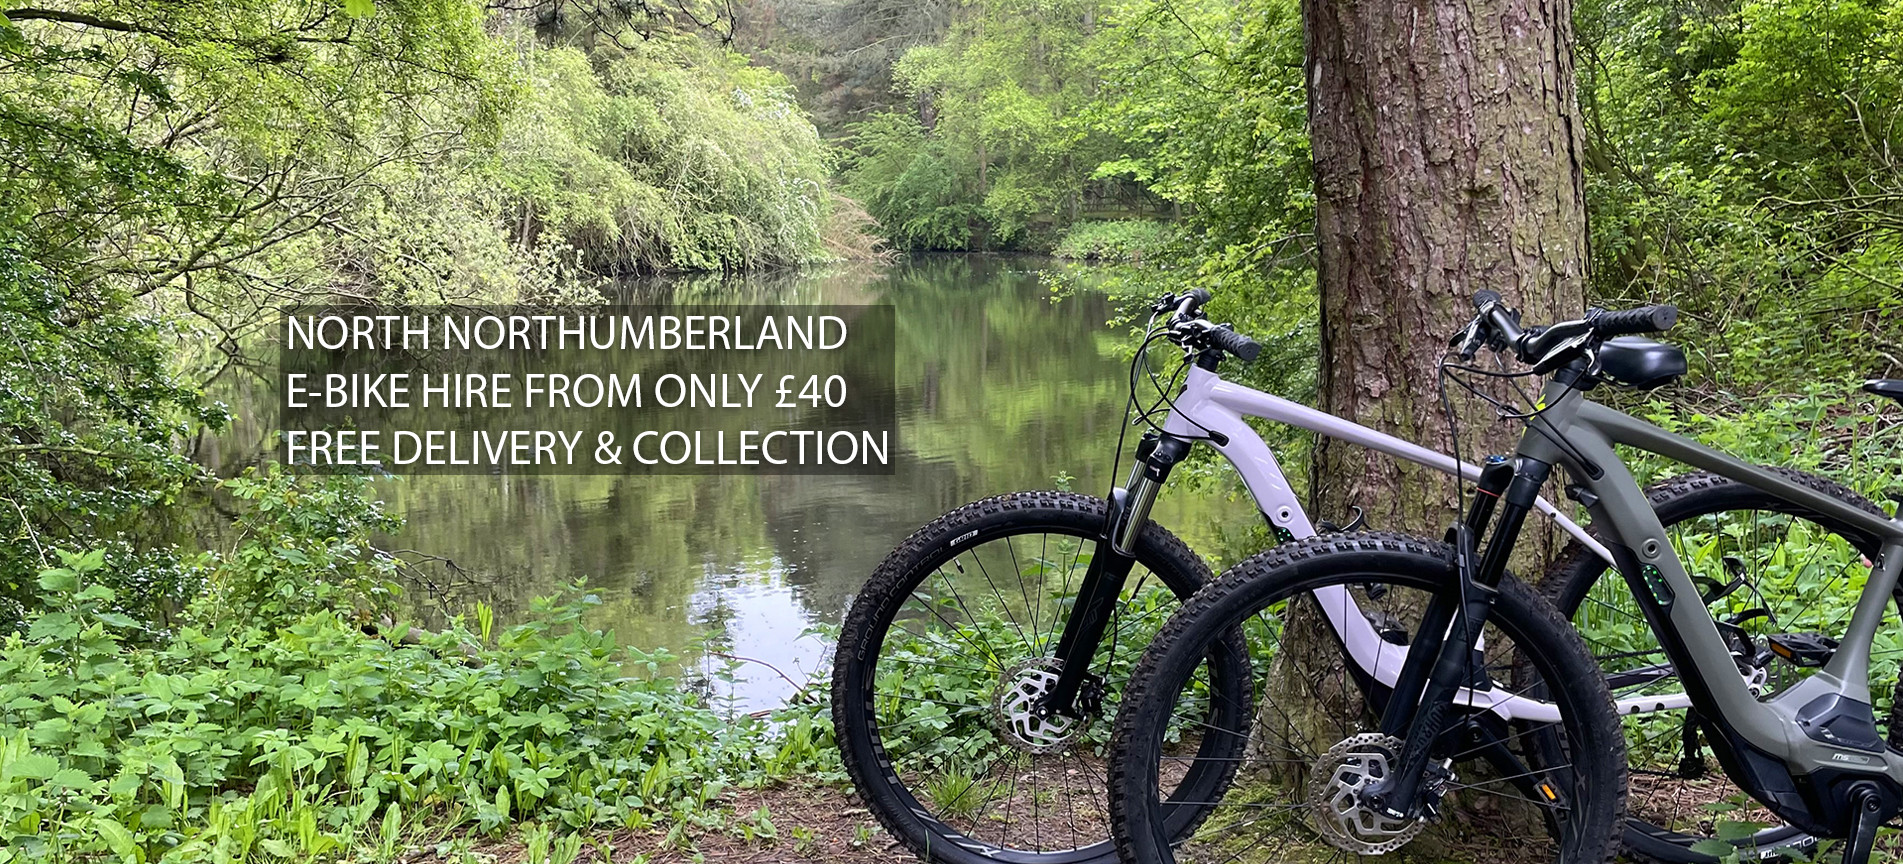 Christon Bank Quarry, Northumberland eBikes - Electric Bicycle Hire